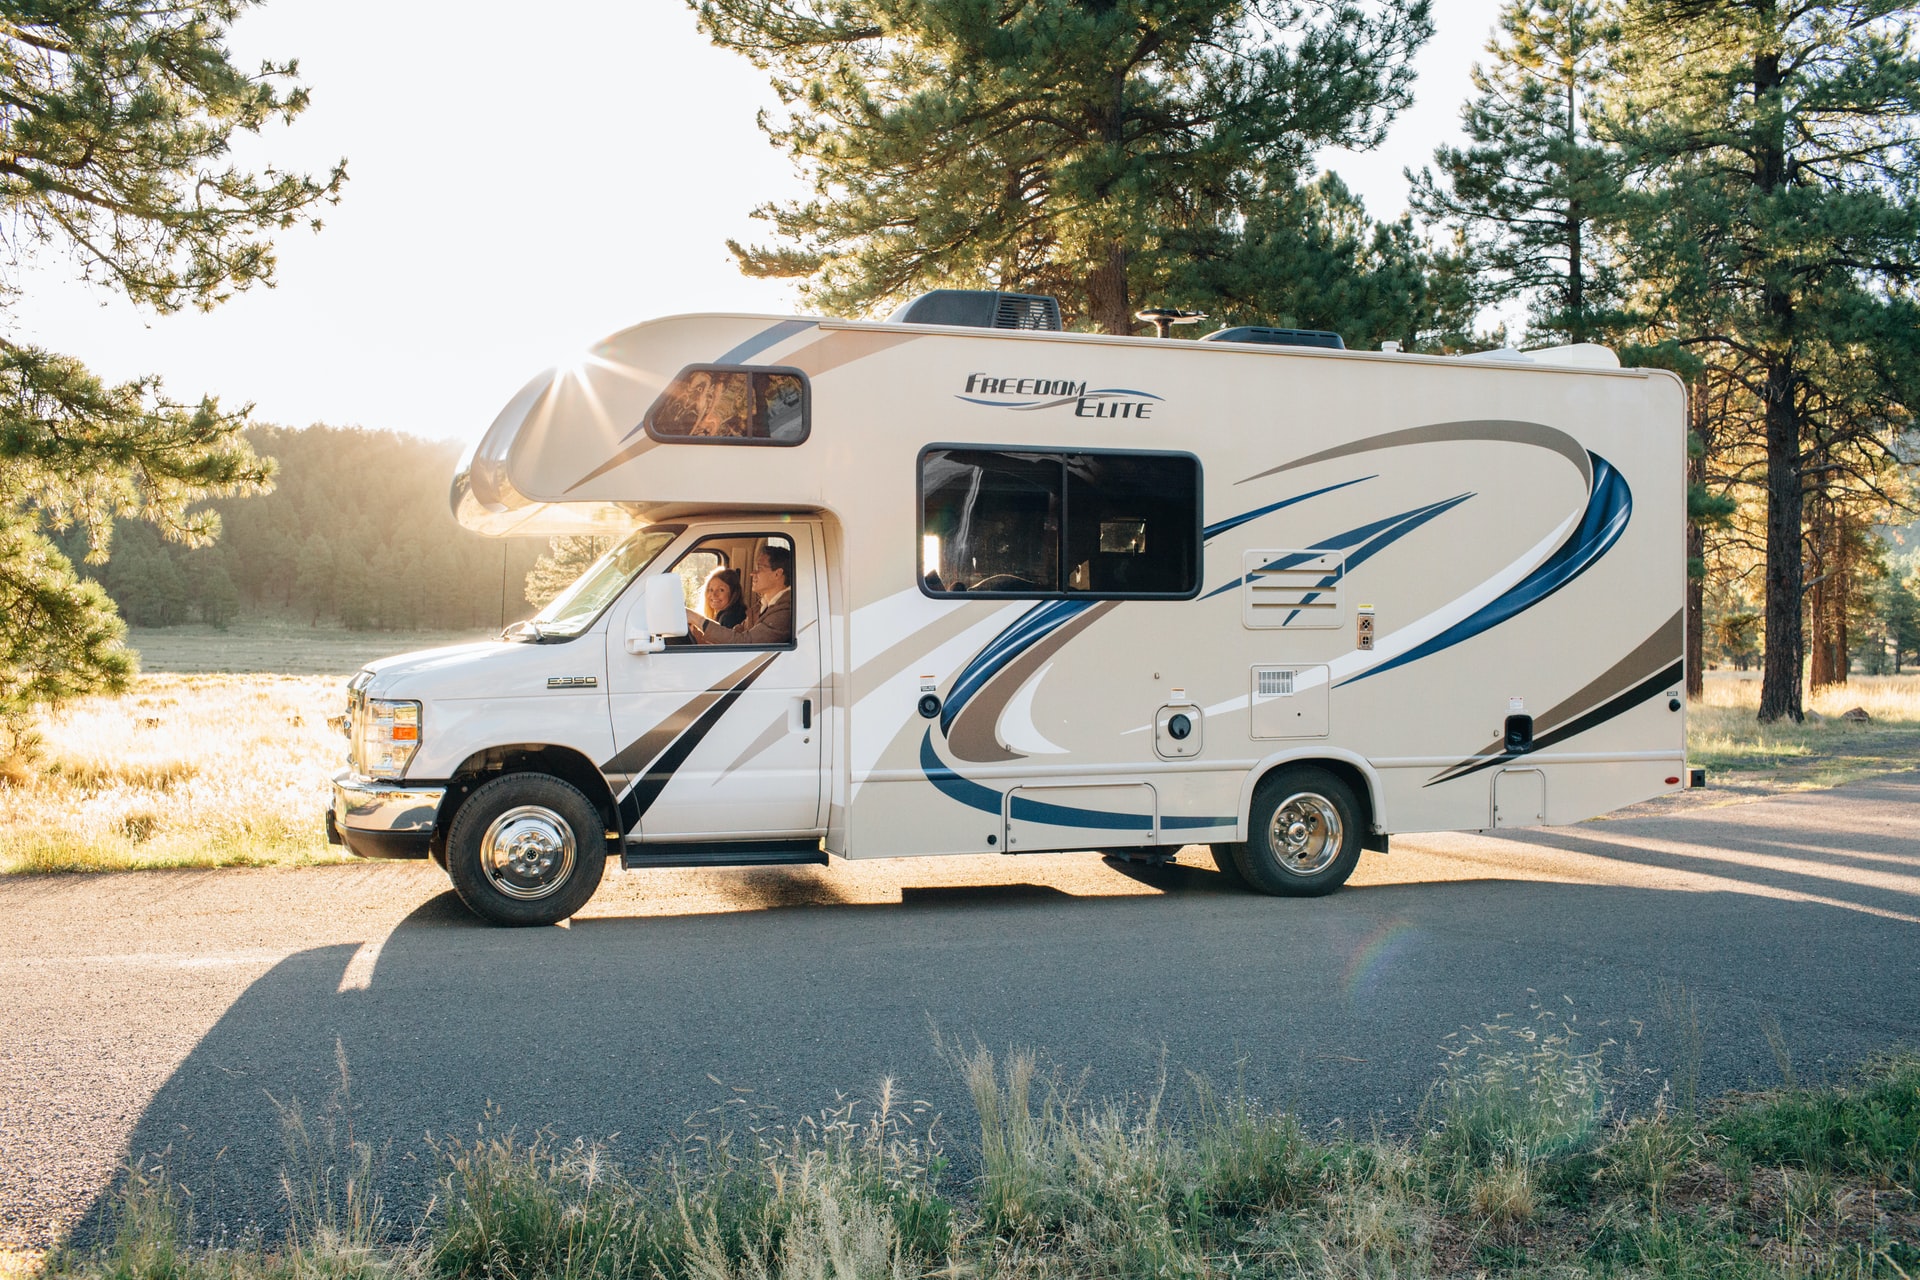 How Much Electricity Does an RV Use in One Month?